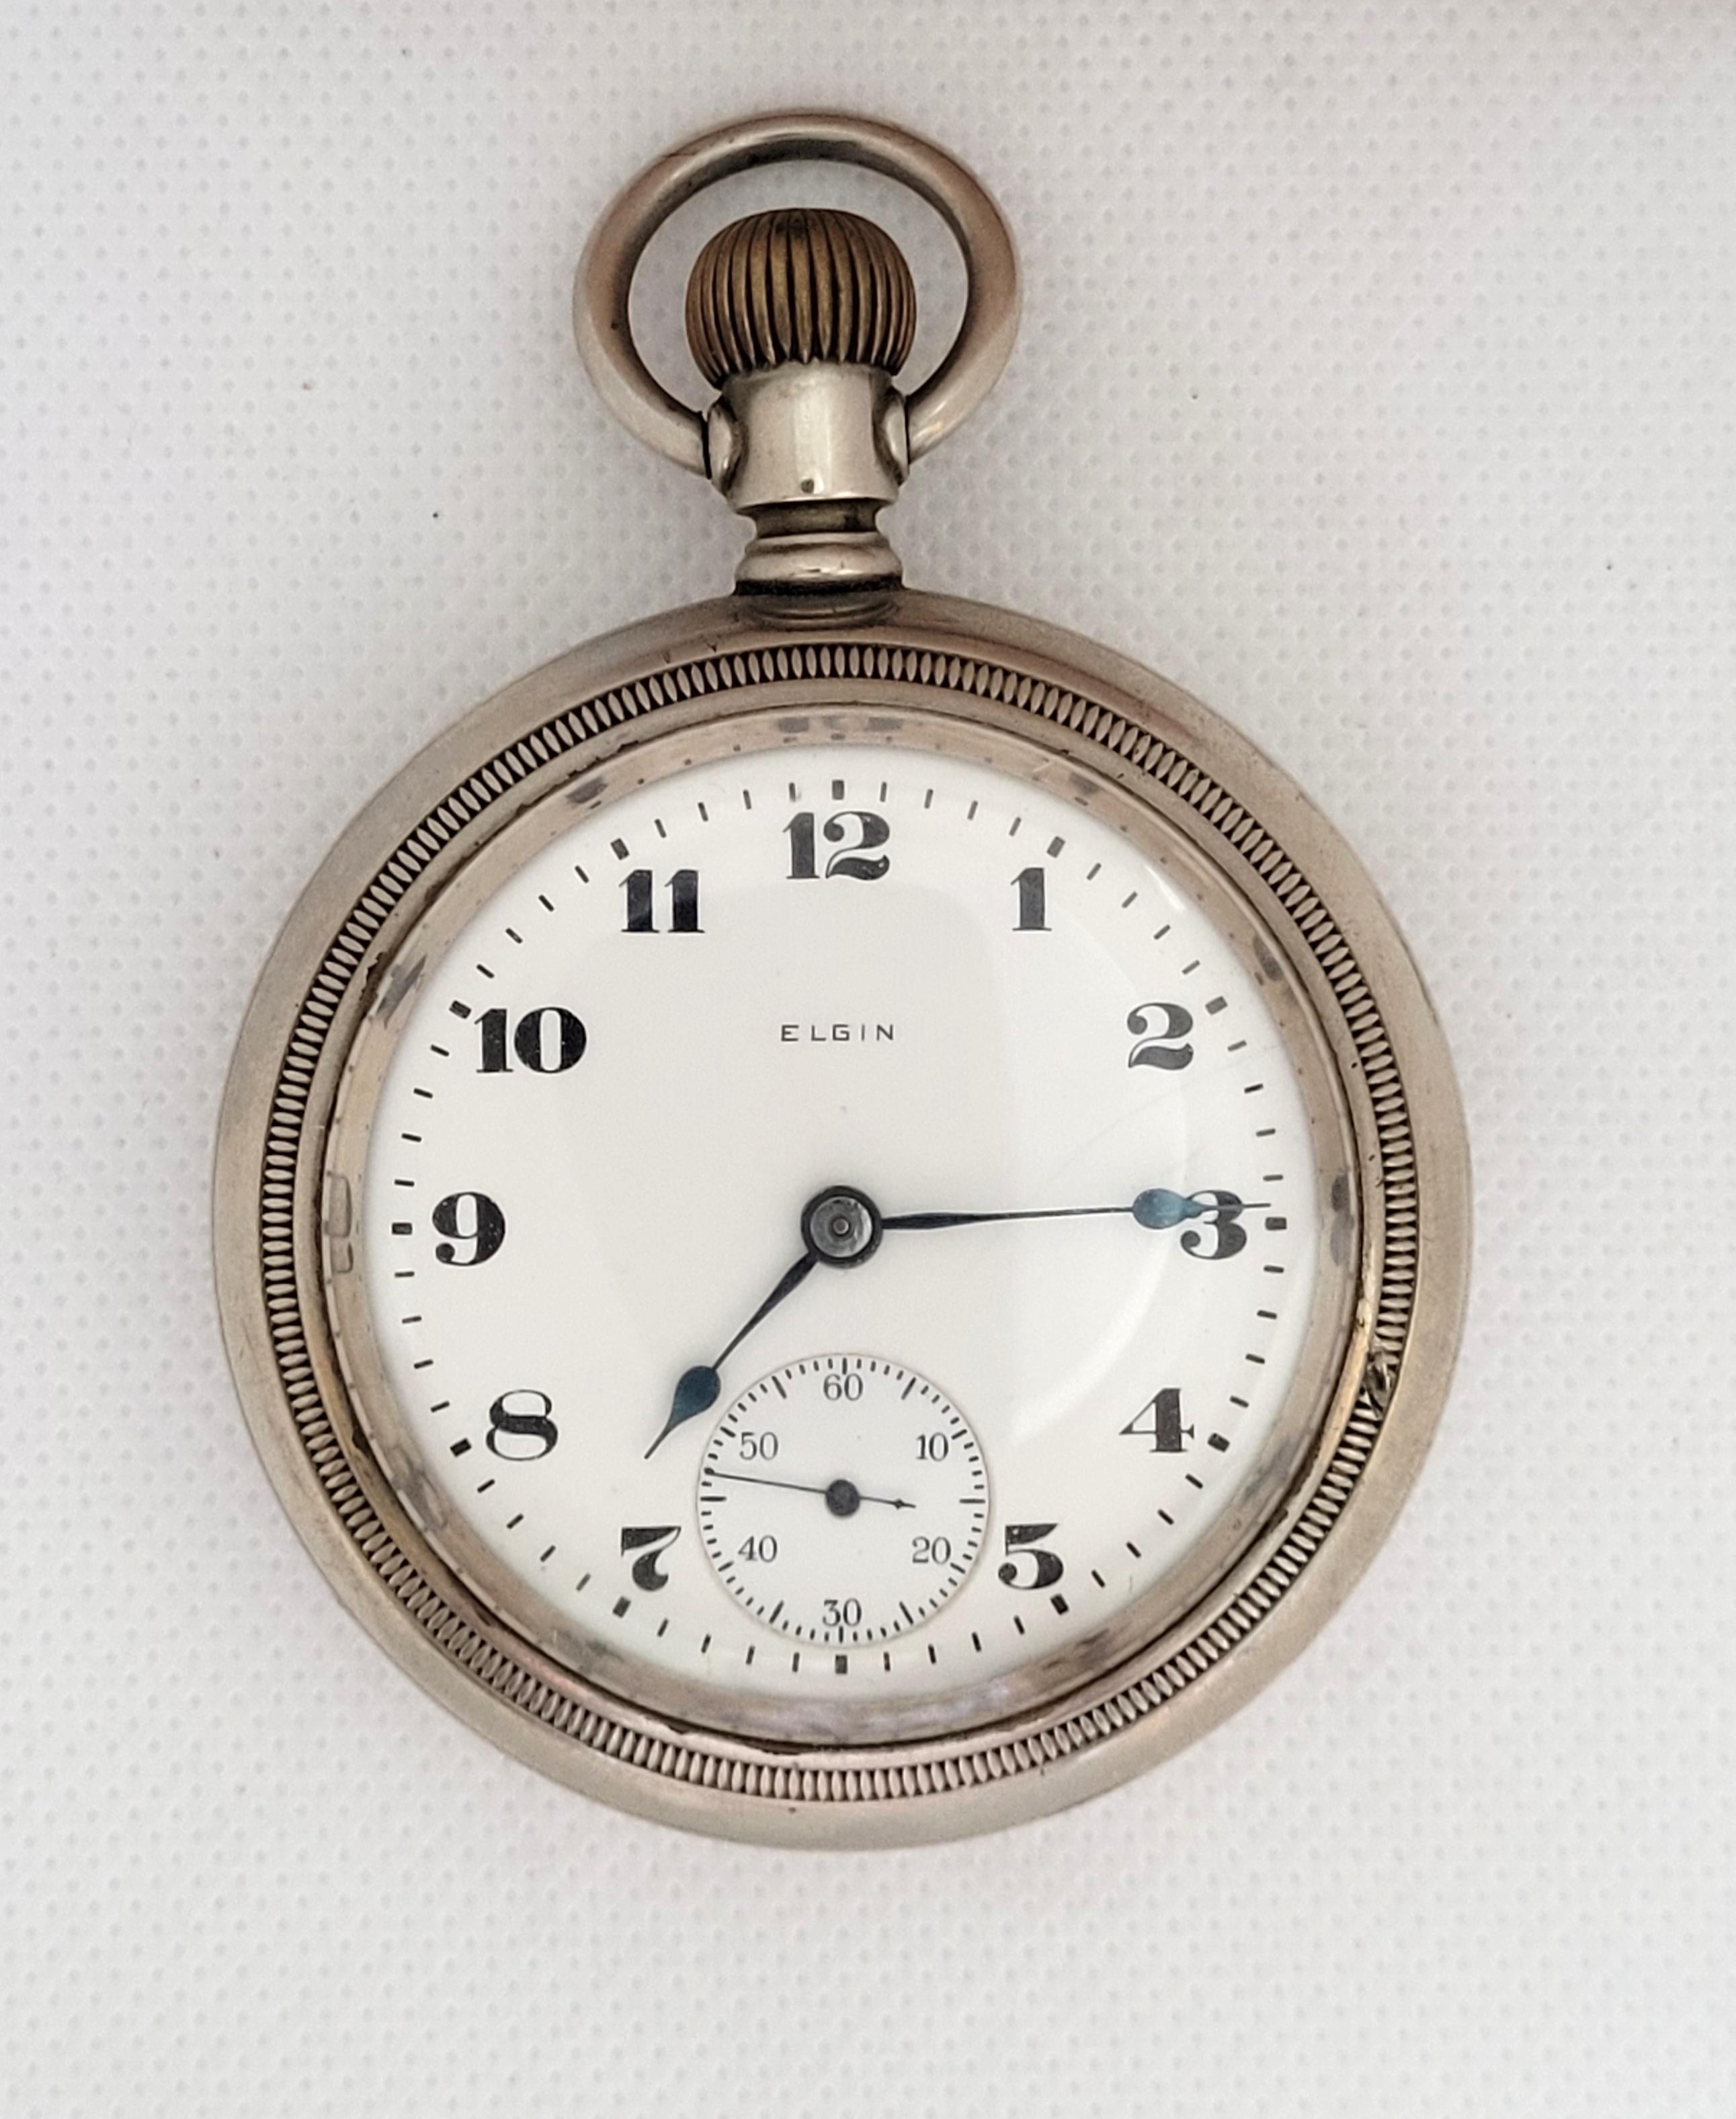 Elgin 1921 railroad pocket watch with a 59mm case made of silverode and is 20mm thick. Heavy watch with a clean plastic crystal. The case has a minor blemish and a light hand carving that could be polished. The movement is 7 jewel, working, and